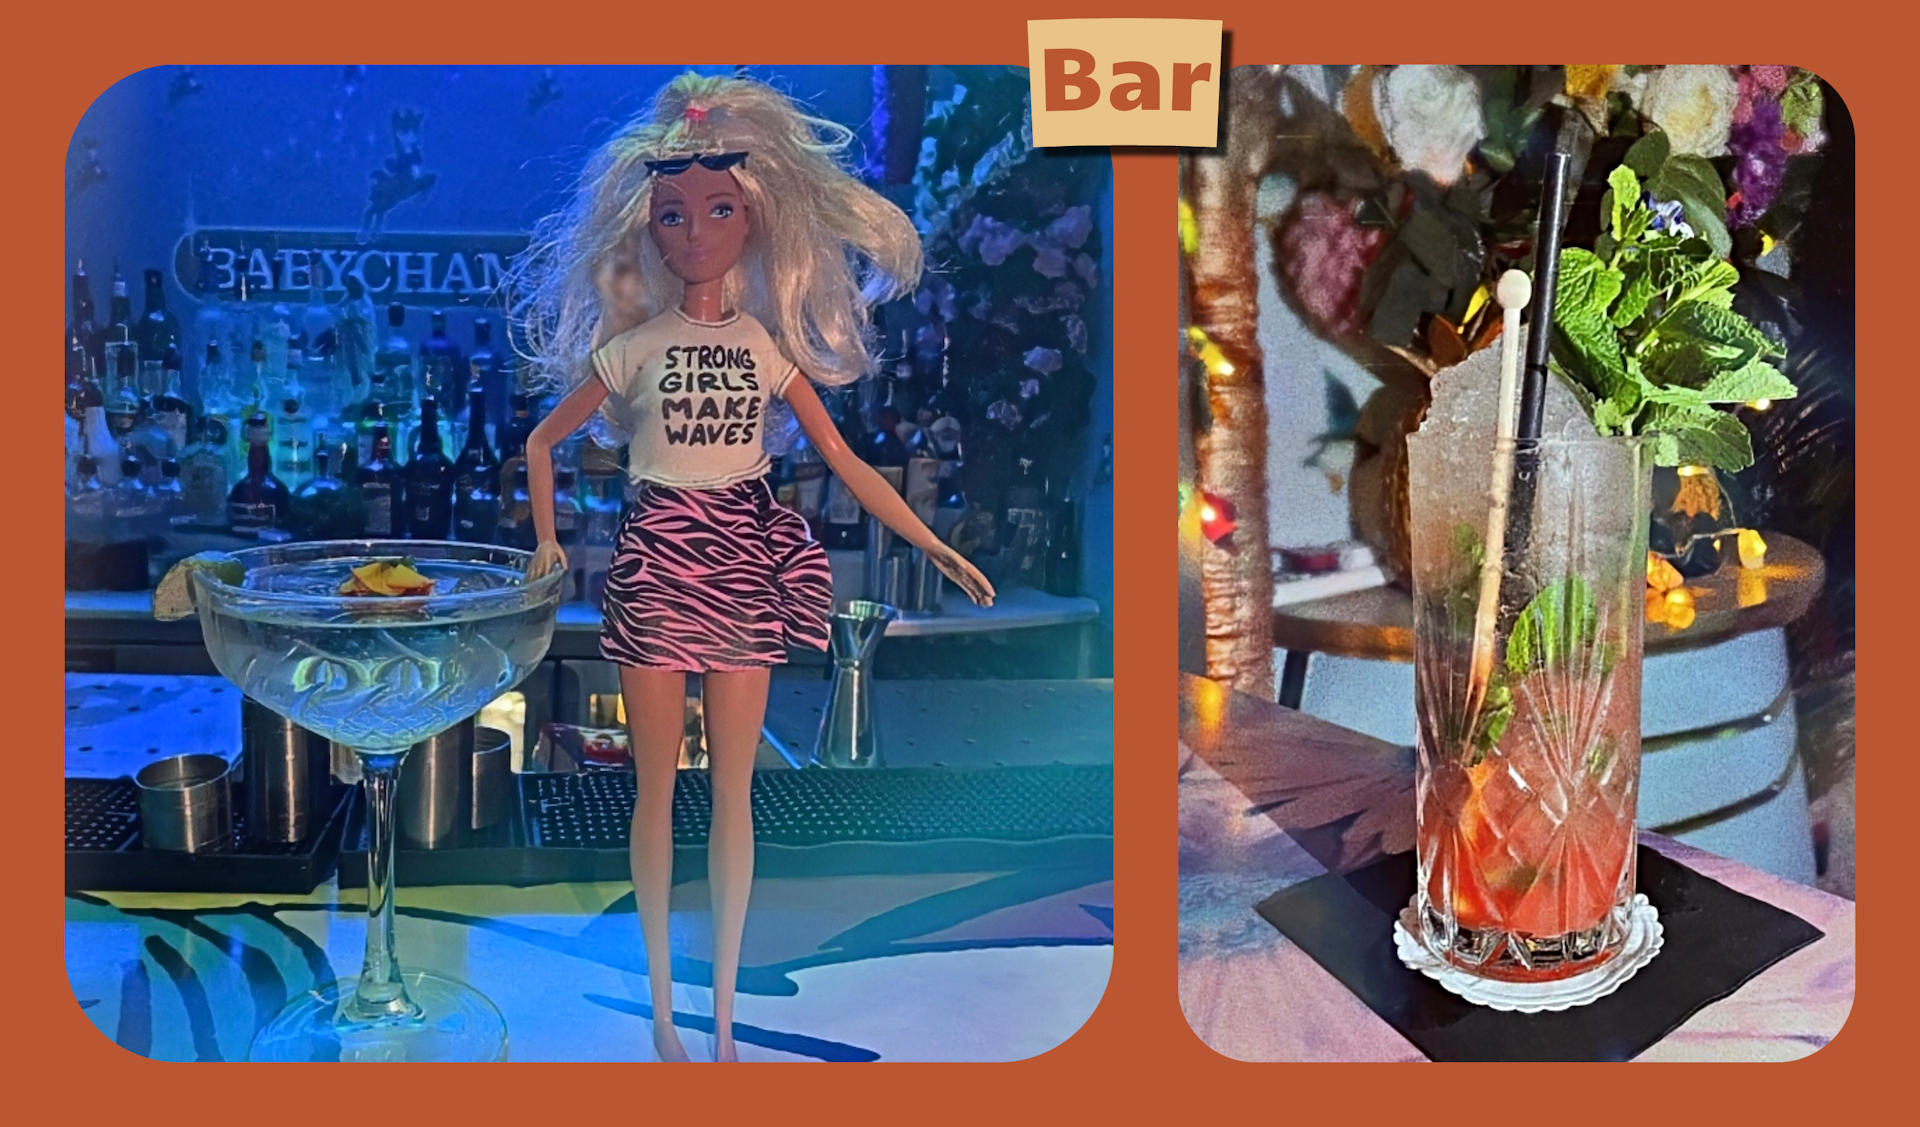 L: A Barbie is propped next to a blue cocktail. R: close-up of cocktail drink with herbs